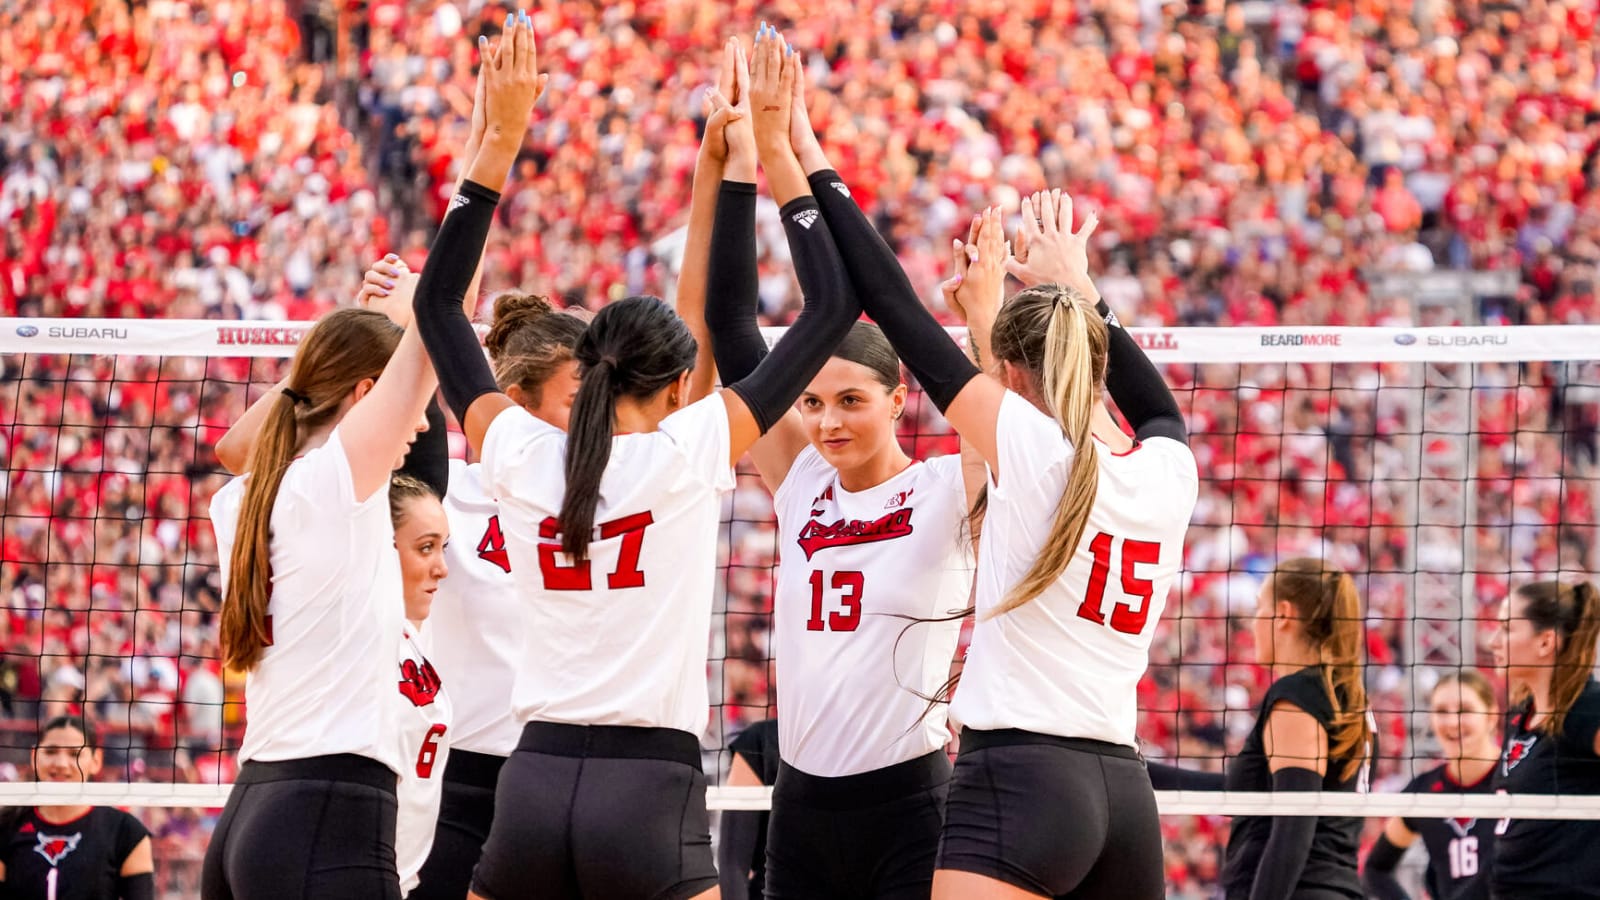 Watch: Nebraska volleyball team enters in front of record 92,000 fans